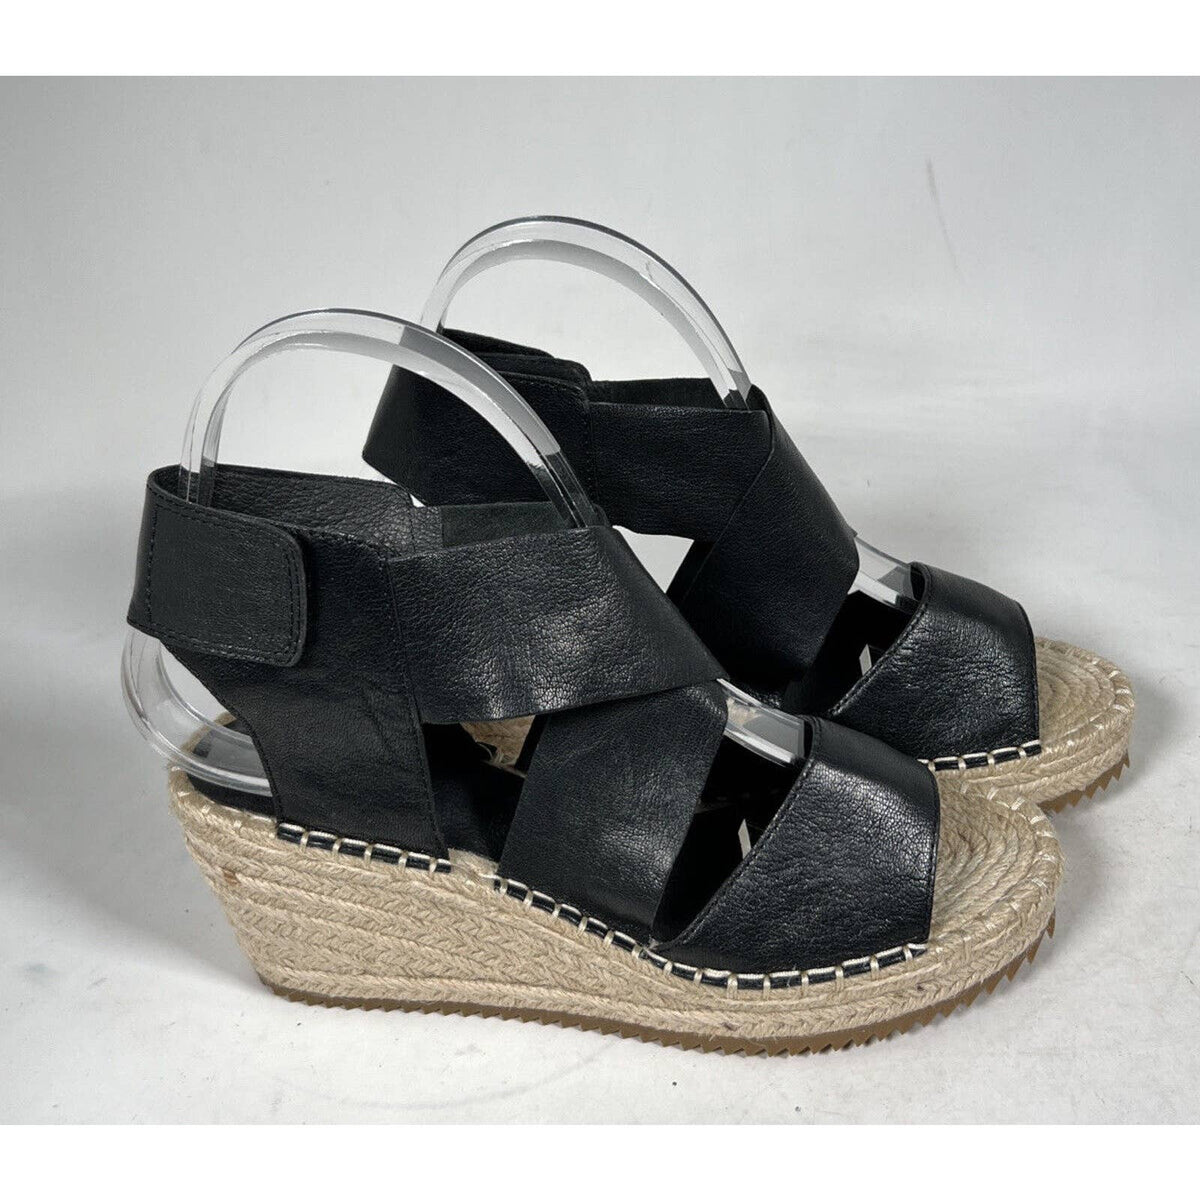 Eileen Fisher Willow Leather Espadrille Sandals Sz.7.5 NEW